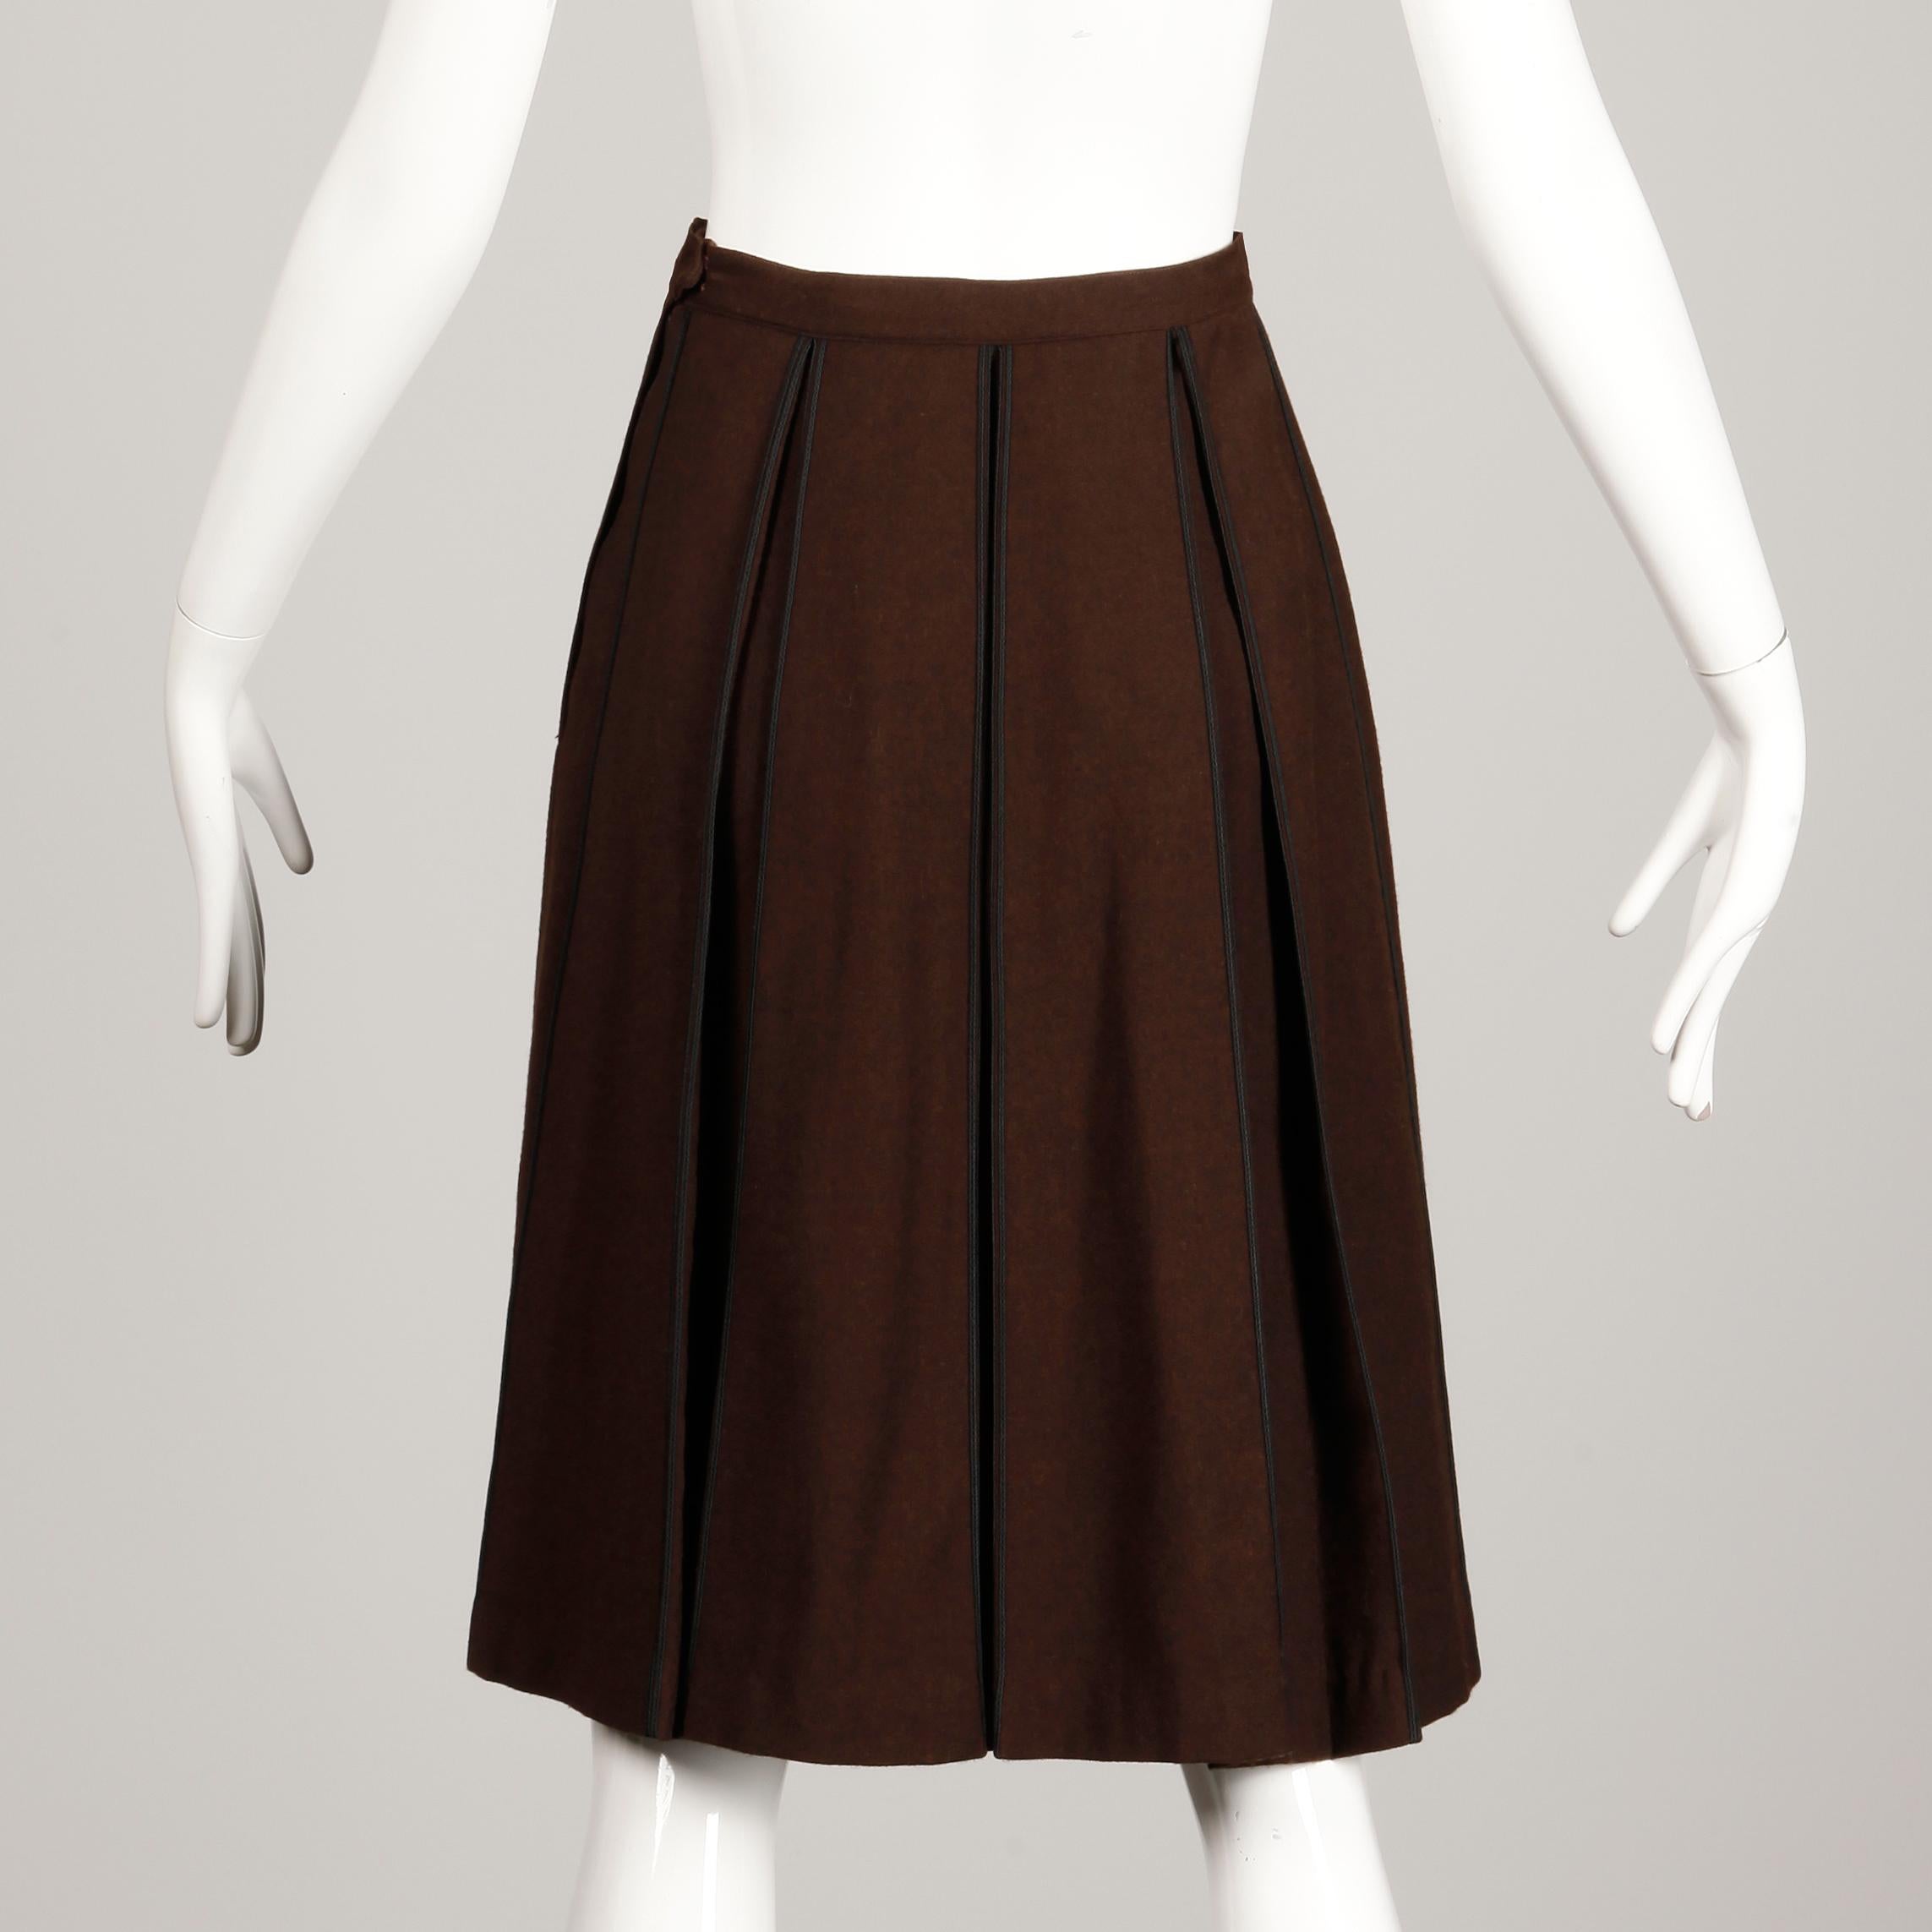 1960s B.H. Wragge Vintage Brown Wool Skirt with Box Pleats + Black Cord Trim For Sale 1